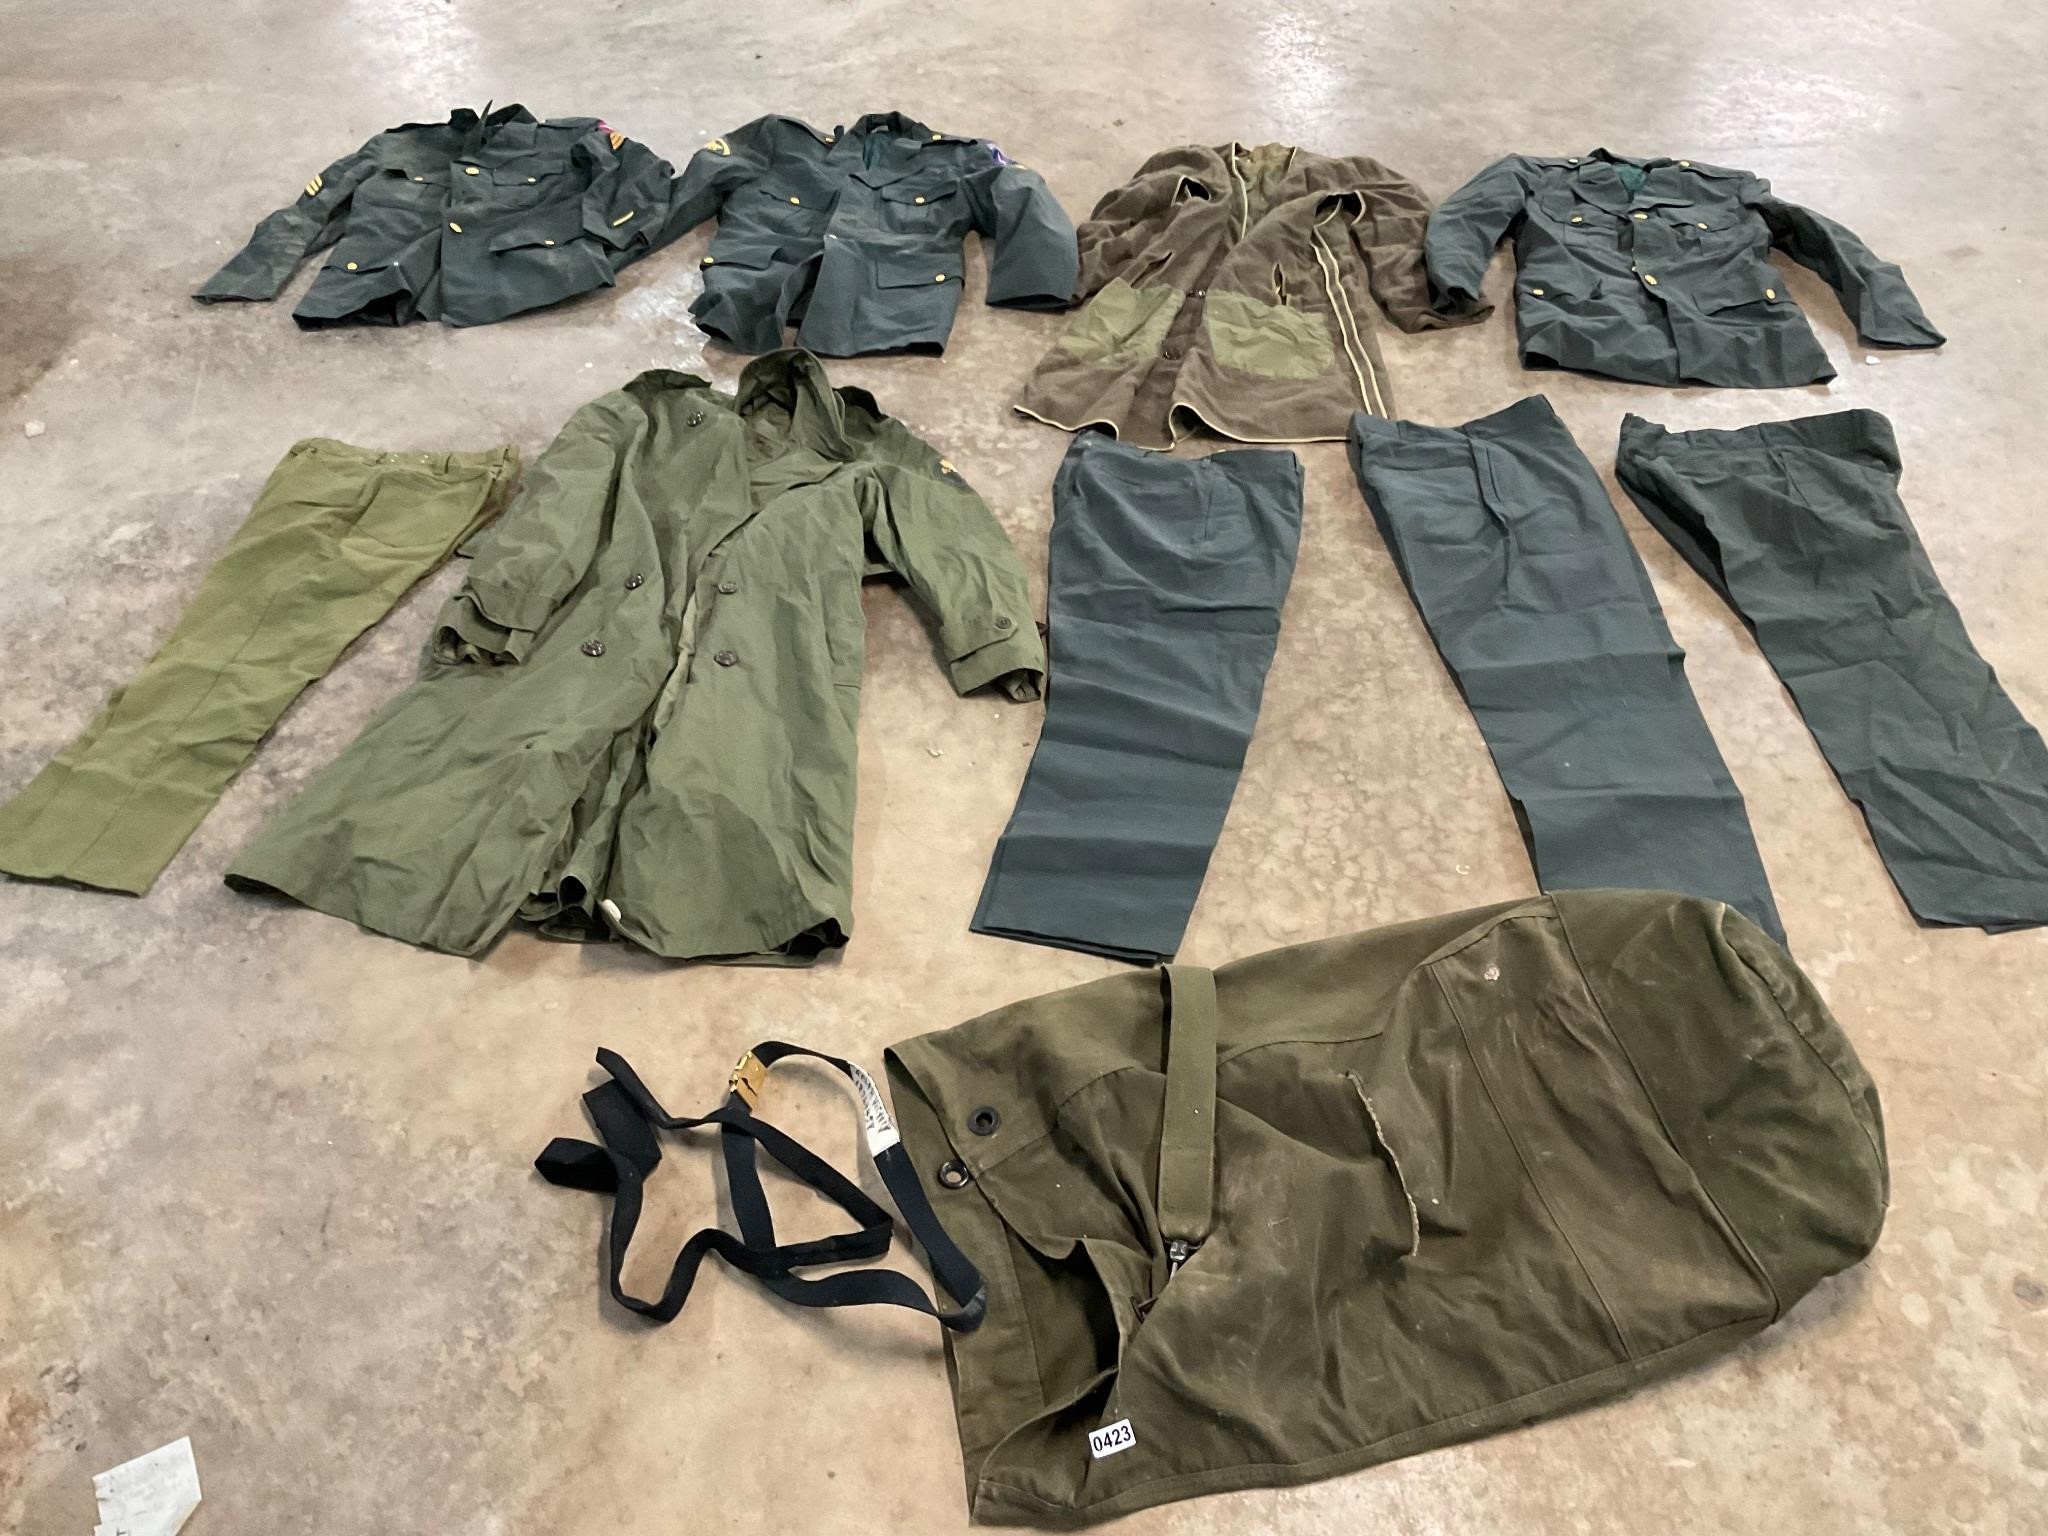 Military Uniforms and duffle bag